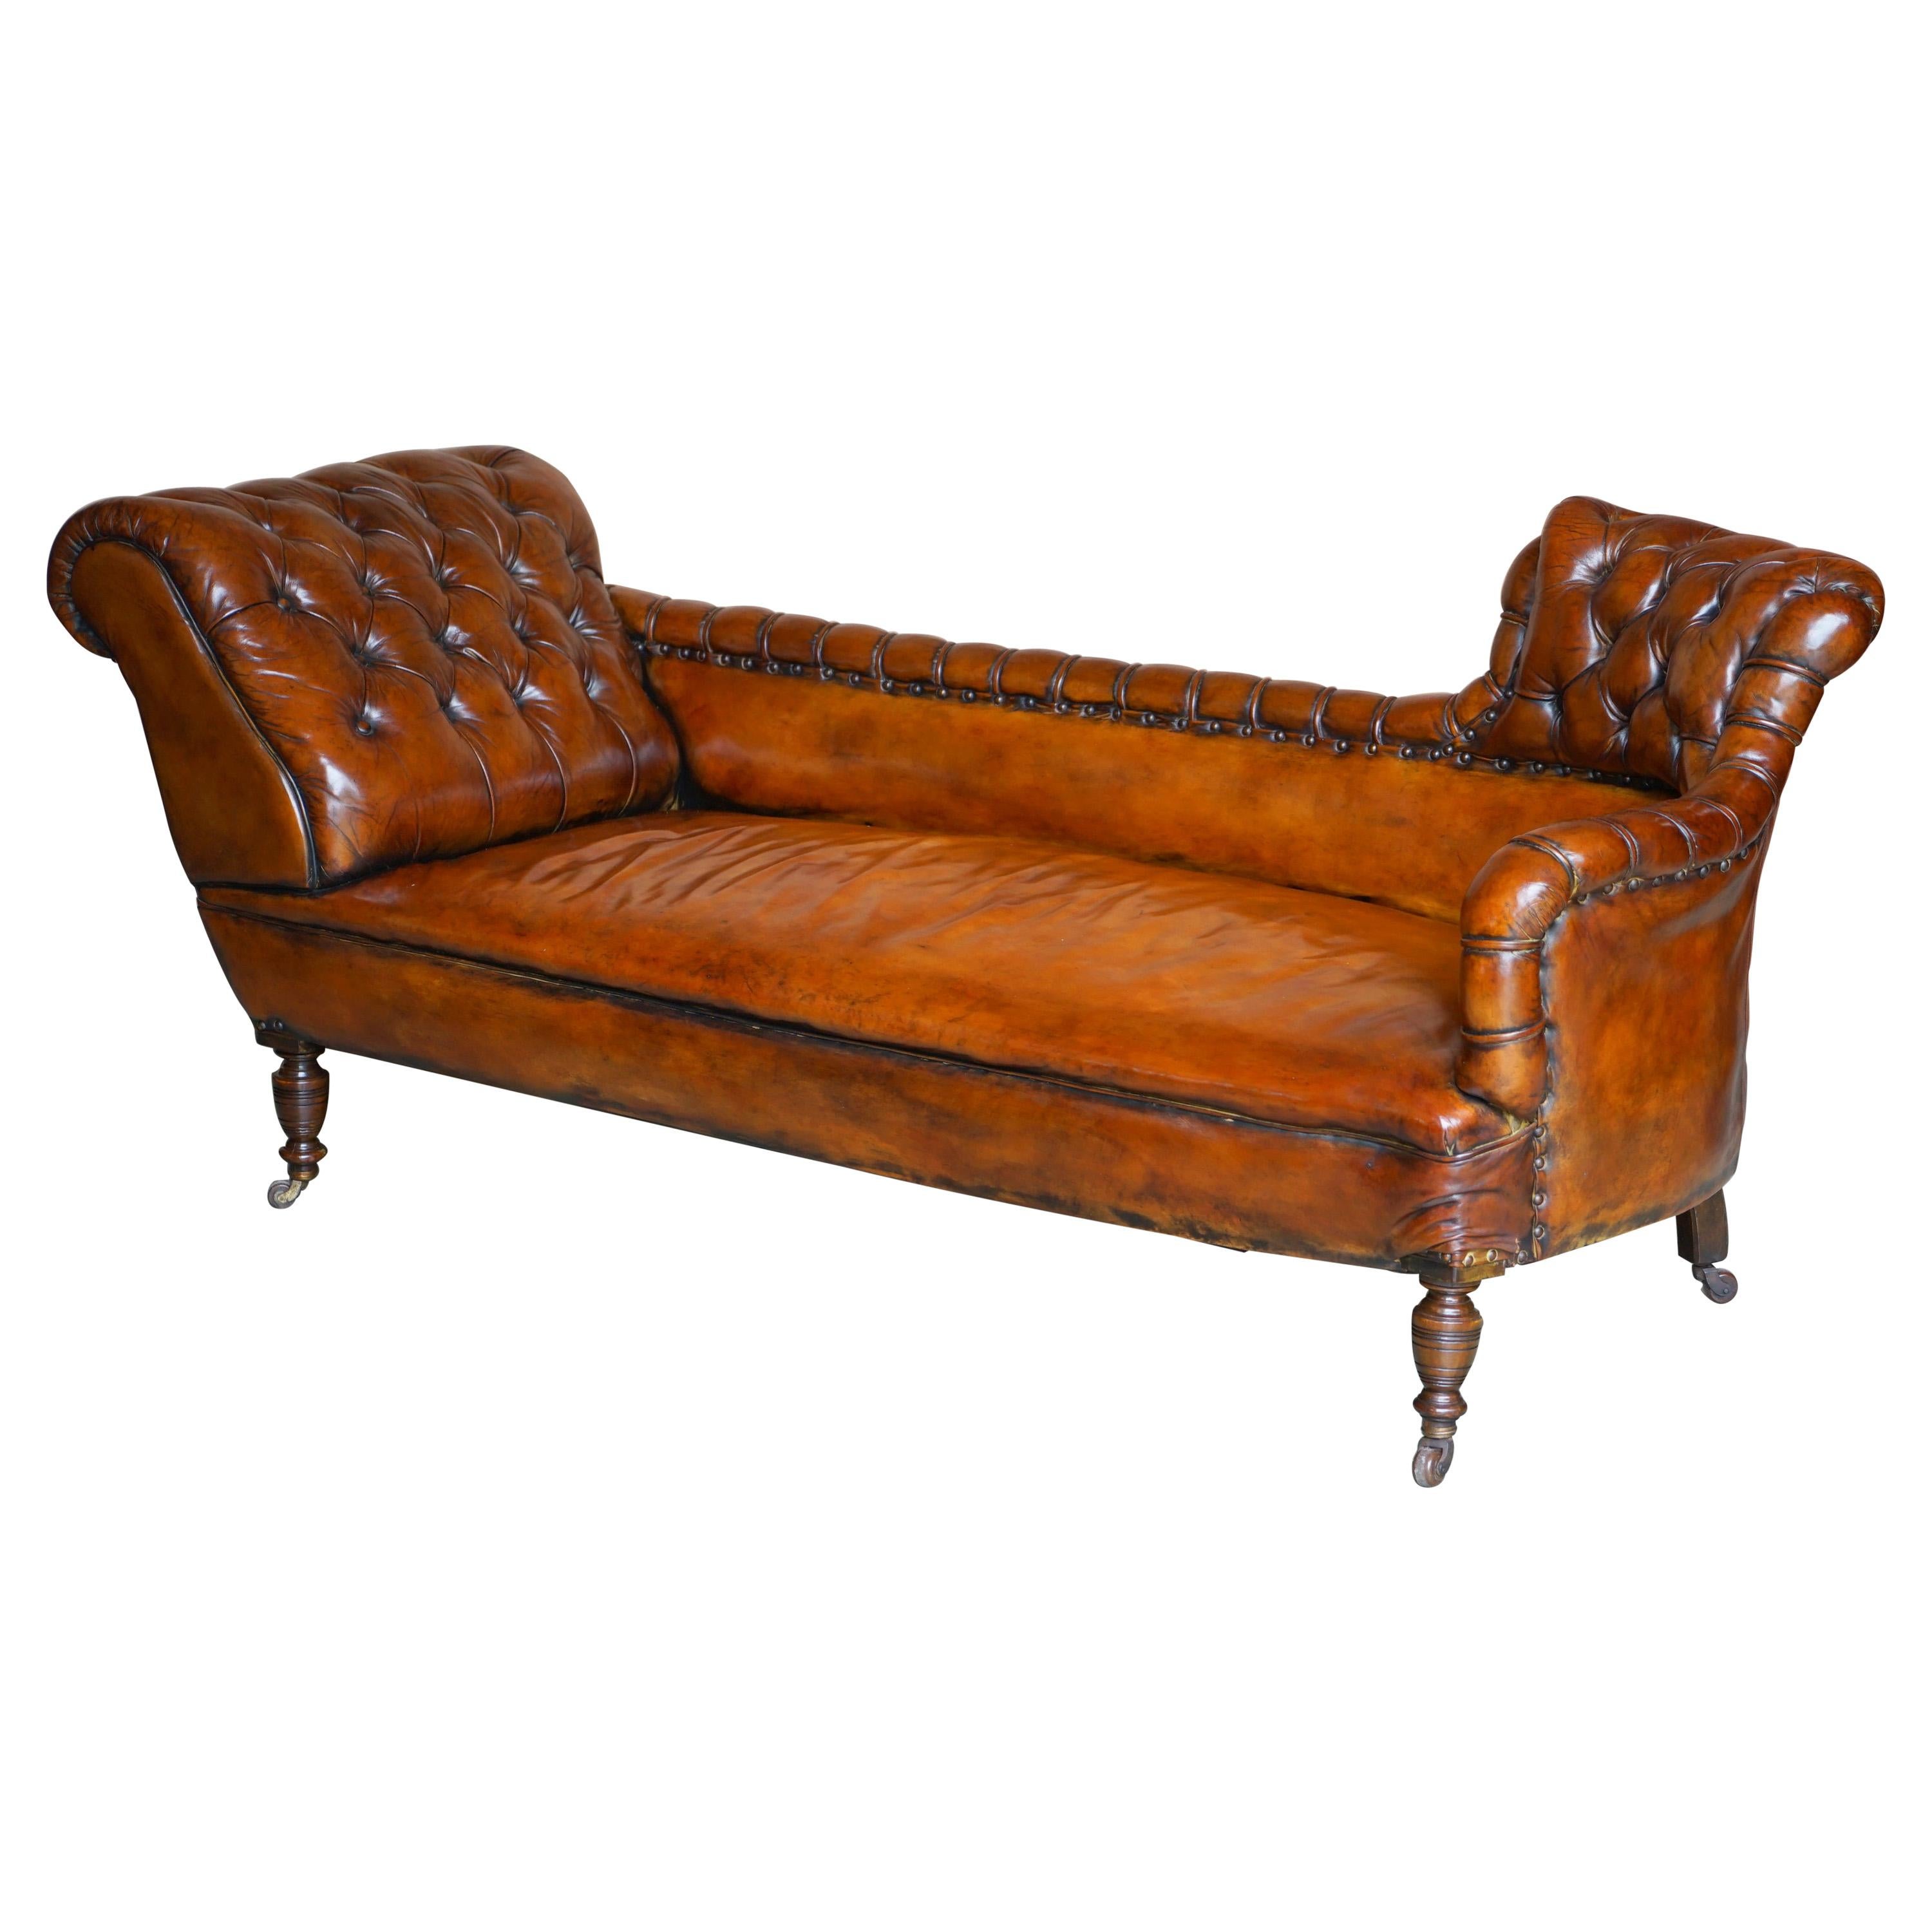 Antique Victorian Whisky Brown Leather Restored Chesterfield Sofa Chaise Lounge